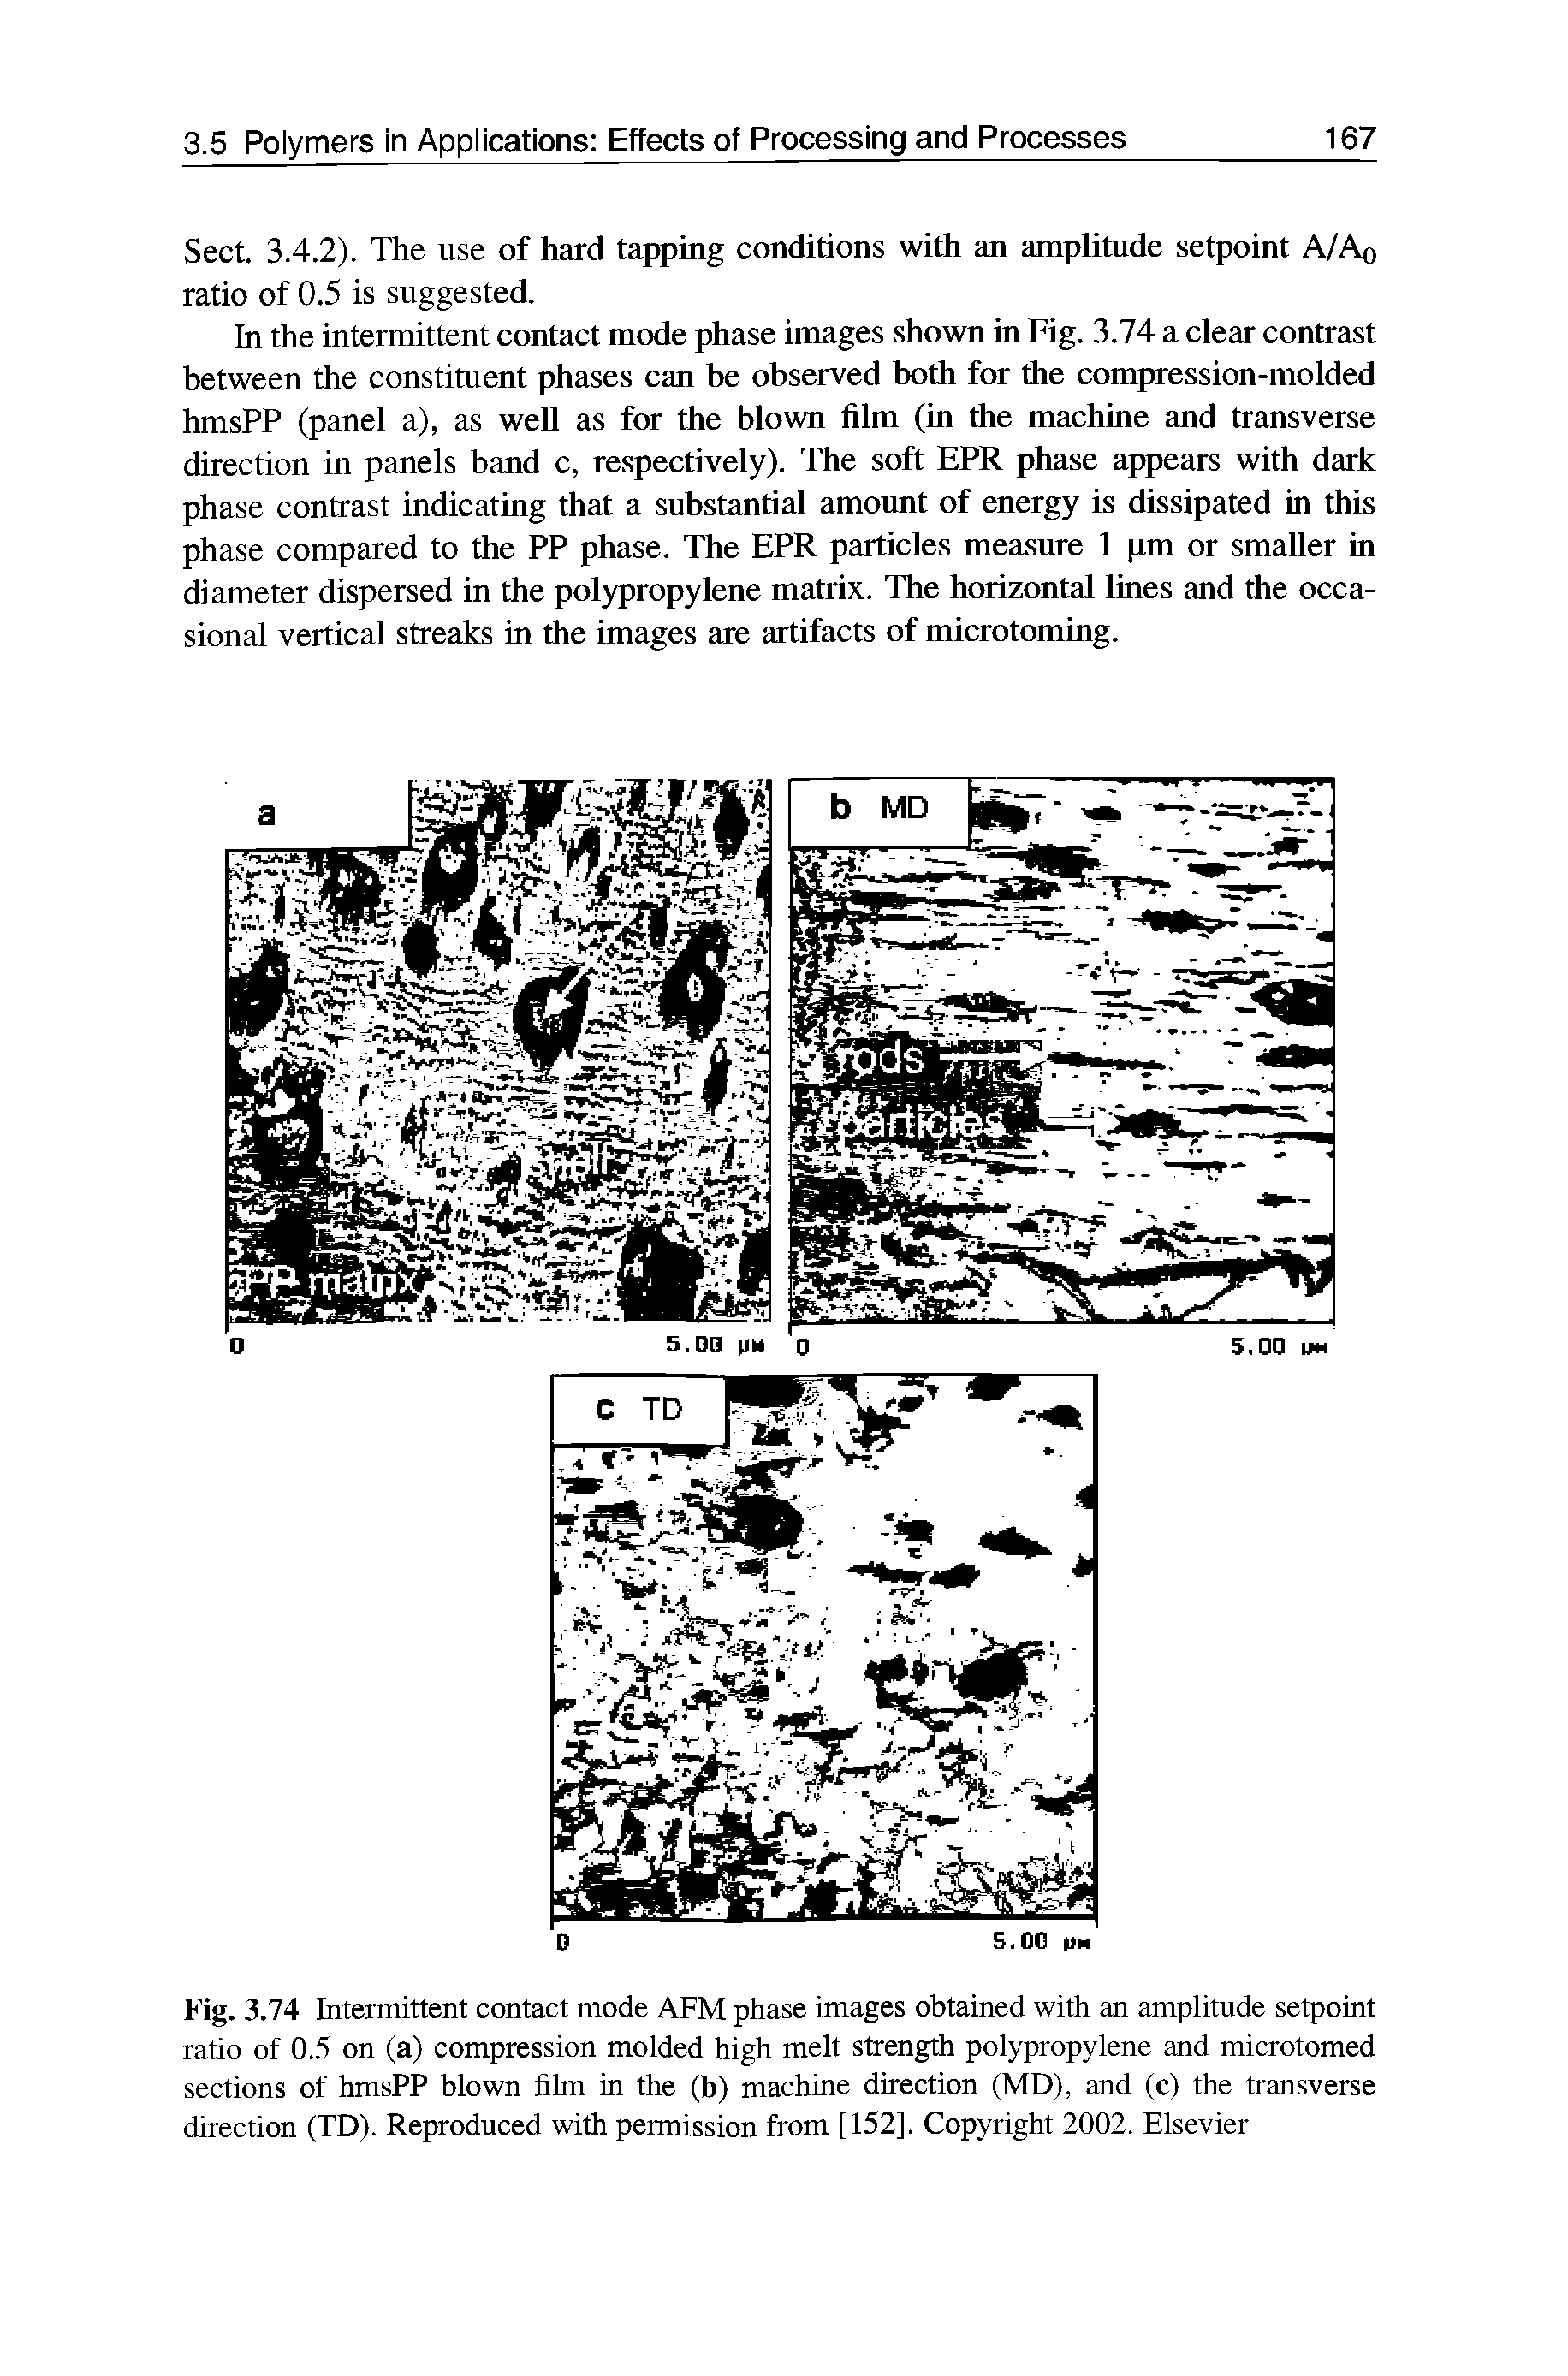 Fig. 3.74 Intermittent contact mode AFM phase images obtained with an amplitude setpoint ratio of 0.5 on (a) compression molded high melt strength polypropylene and microtomed sections of hmsPP blown film in the (b) machine direction (MD), and (c) the transverse direction (TD). Reproduced with permission from [152]. Copyright 2002. Elsevier...